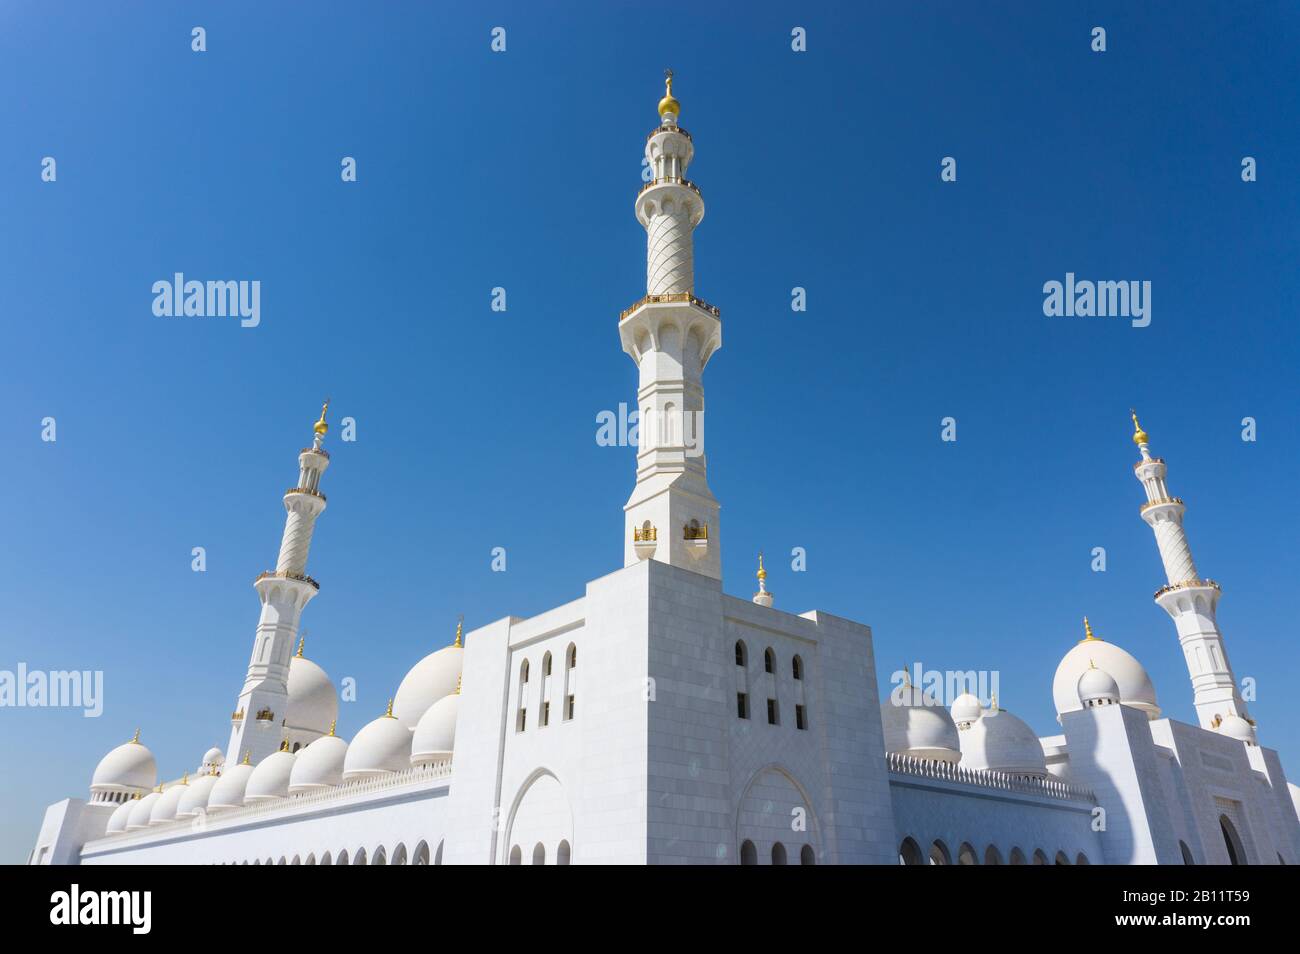 Striking white minarets and domes of the Sheikh Zayad Grand Mosque, against a brilliant blue sky. Stock Photo